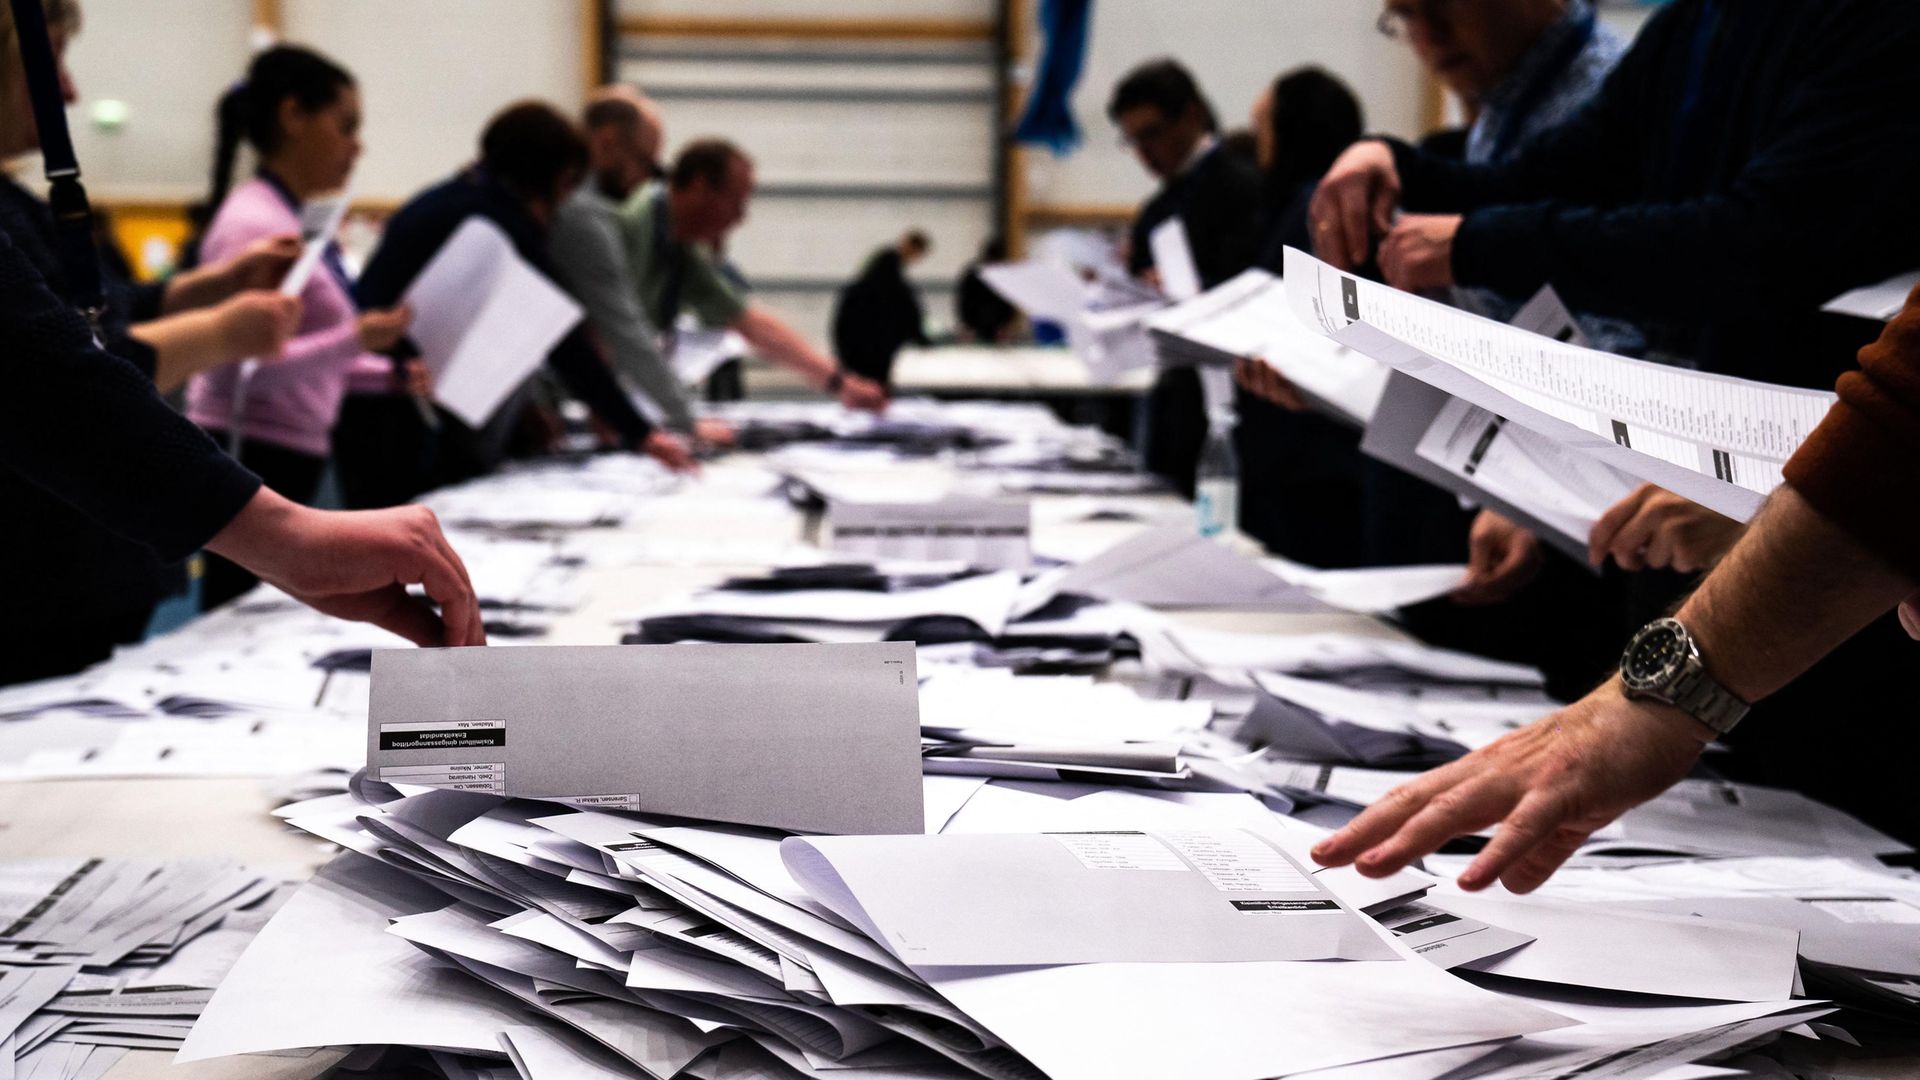 Electoral workers count ballots during elections in Nuuk, Greenland - Credit: Ritzau Scanpix/AFP via Getty Images